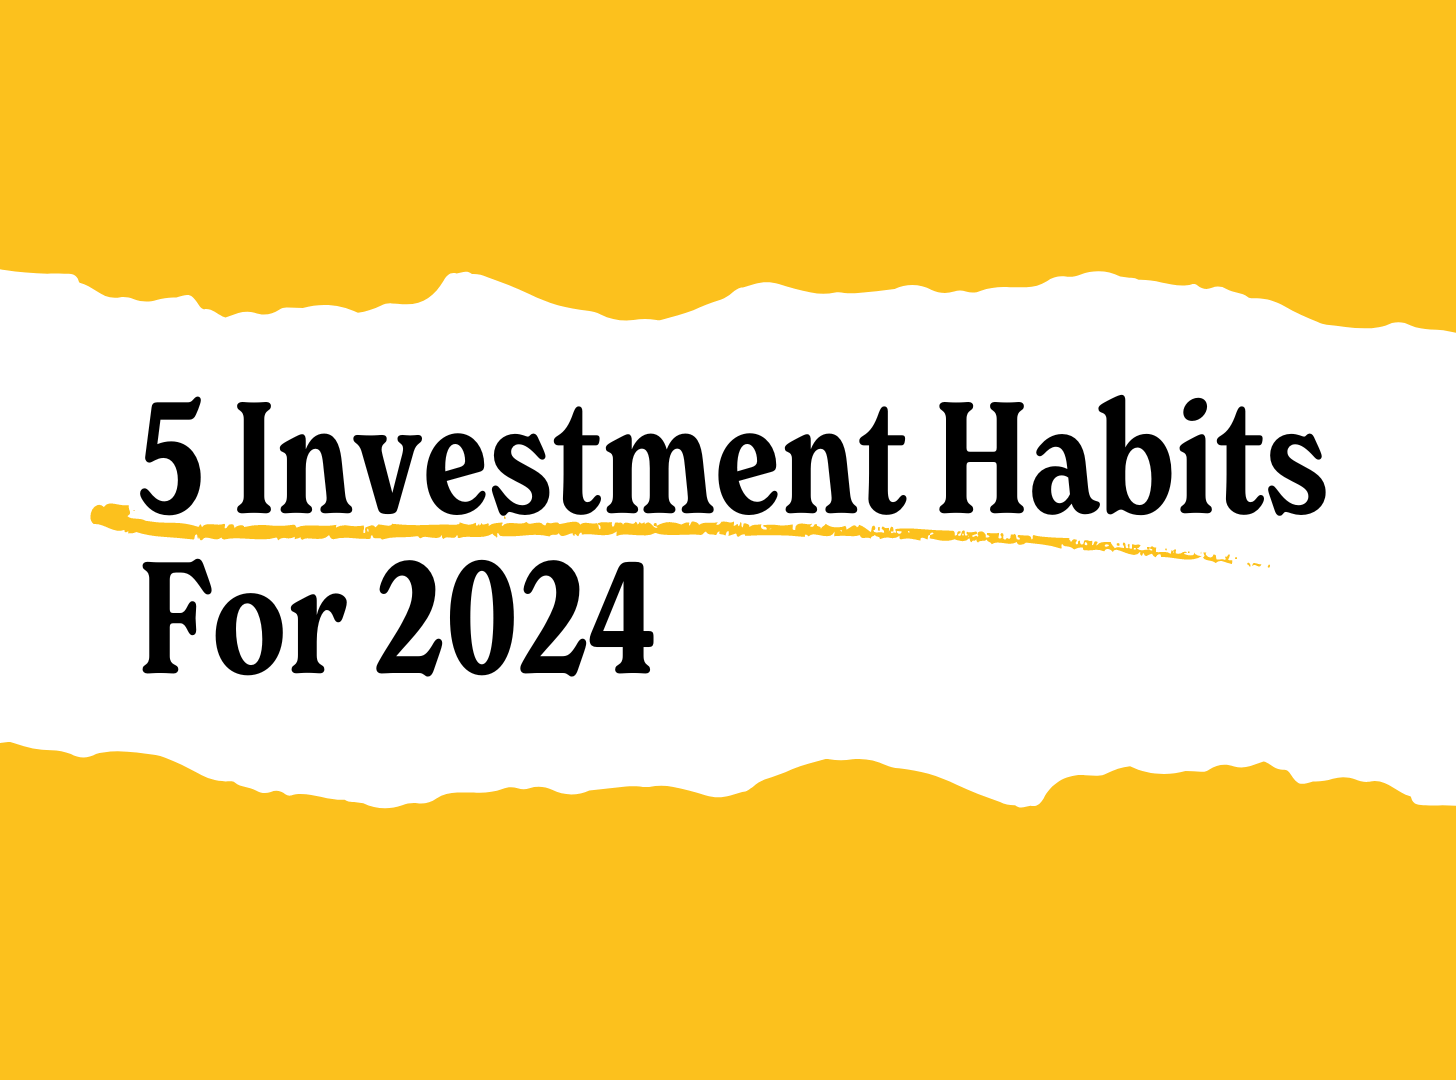 Top 5 Investment Habits for 2024